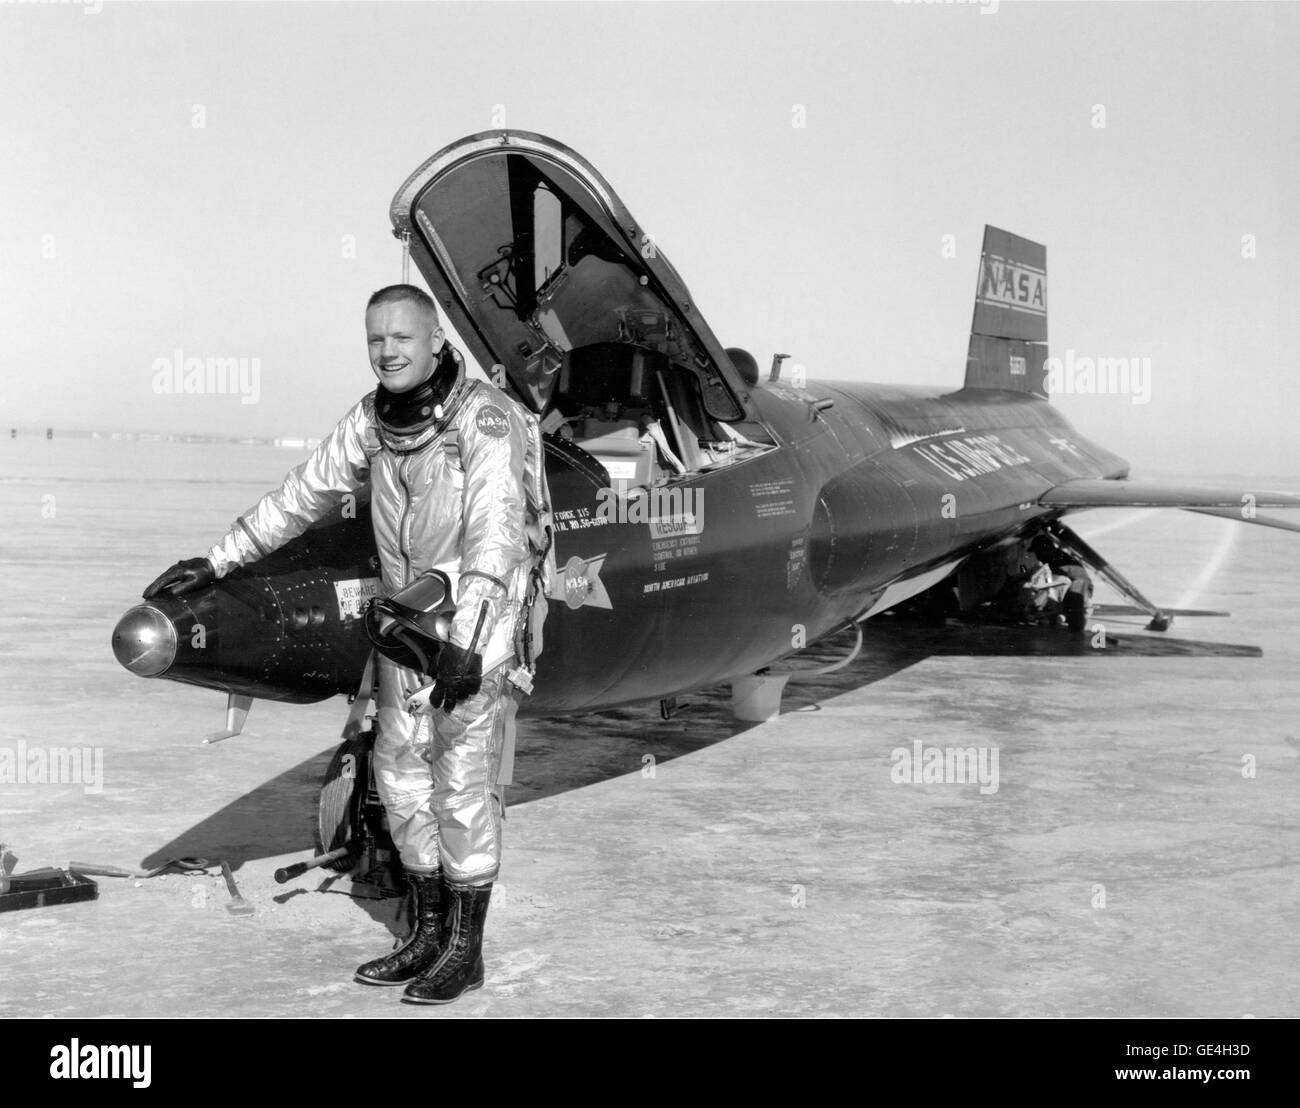 (November 30, 1959) Dryden pilot Neil Armstrong is seen here next to the X-15 ship 1 (56-6670) after a research flight. The X-15 was a rocket-powered aircraft 50 feet long with a wingspan of 22 feet. It was a missile-shaped vehicle with an unusual wedge-shaped vertical tail, thin stubby wings, and unique side fairings that extended along the side of the fuselage. The X-15 was flown over a period of nearly 10 years, from June 1959 to October 1968. It set the world's unofficial speed and altitude records. Information gained from the highly successful X-15 program contributed to the development o Stock Photo